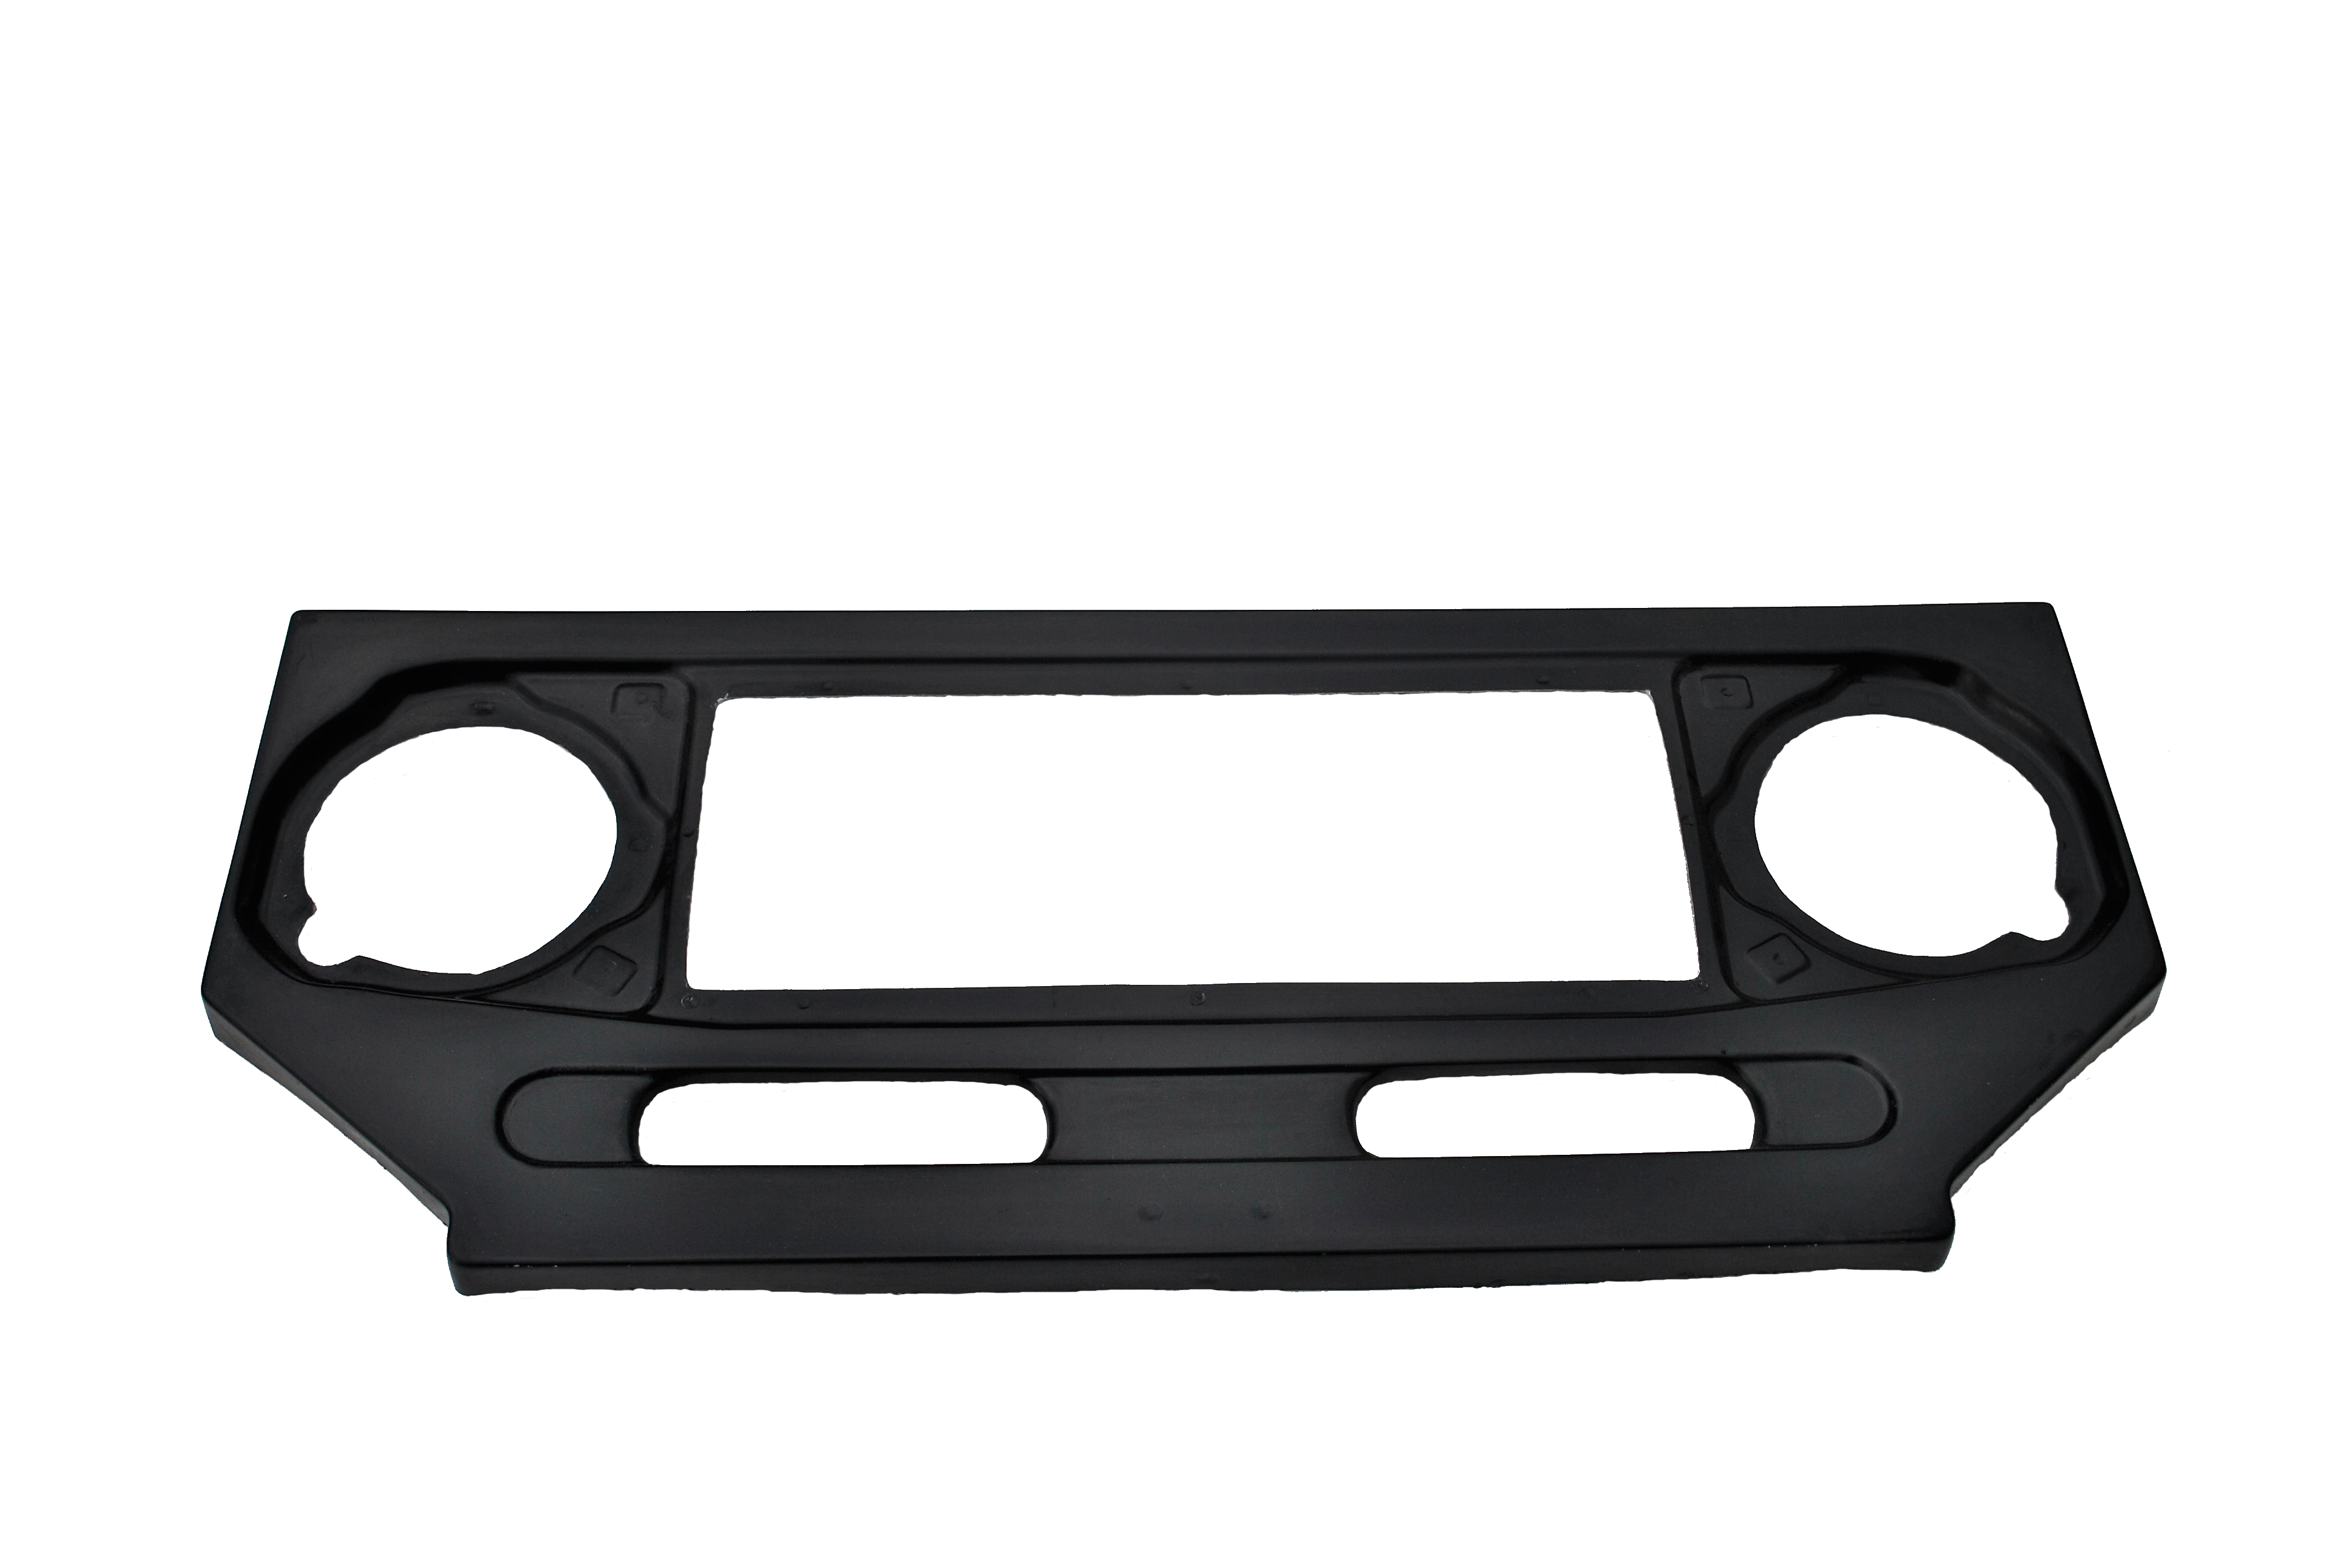 FJ40 45 Series Late Nose Panel (79 - 84)  - suits Toyota